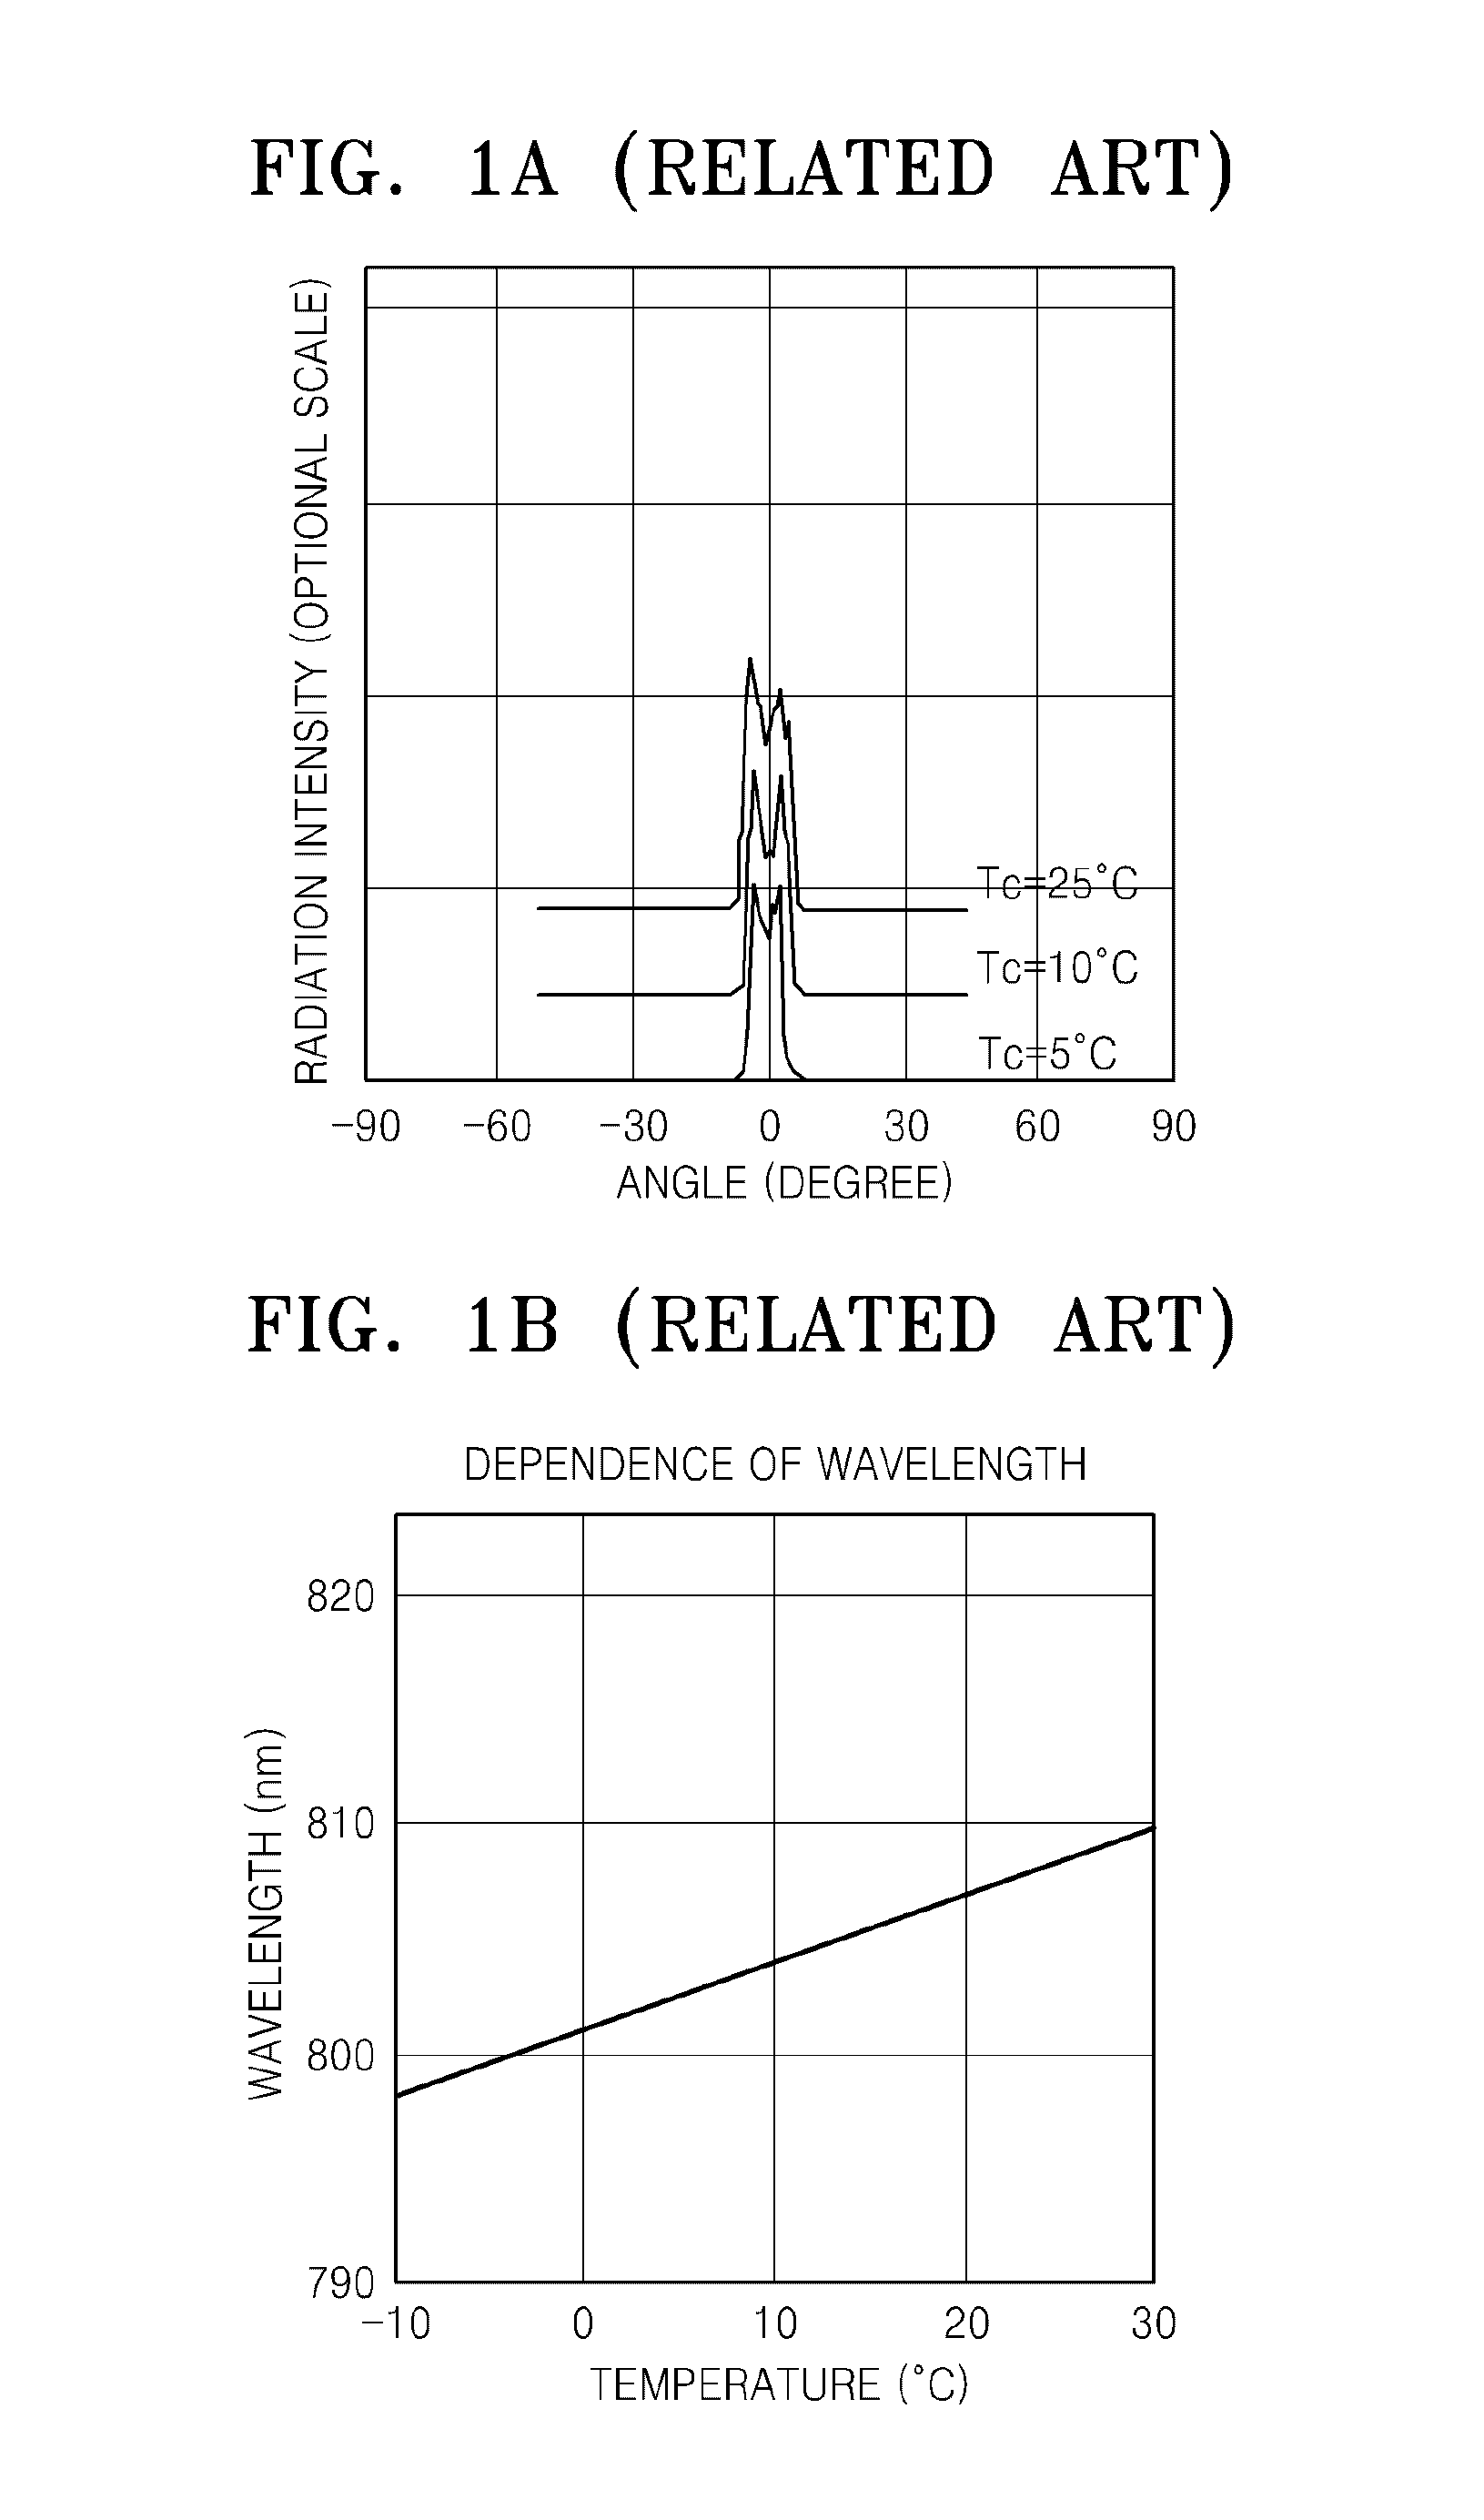 Biochemical analyzer and method of controlling internal temperature of the biochemical analyzer